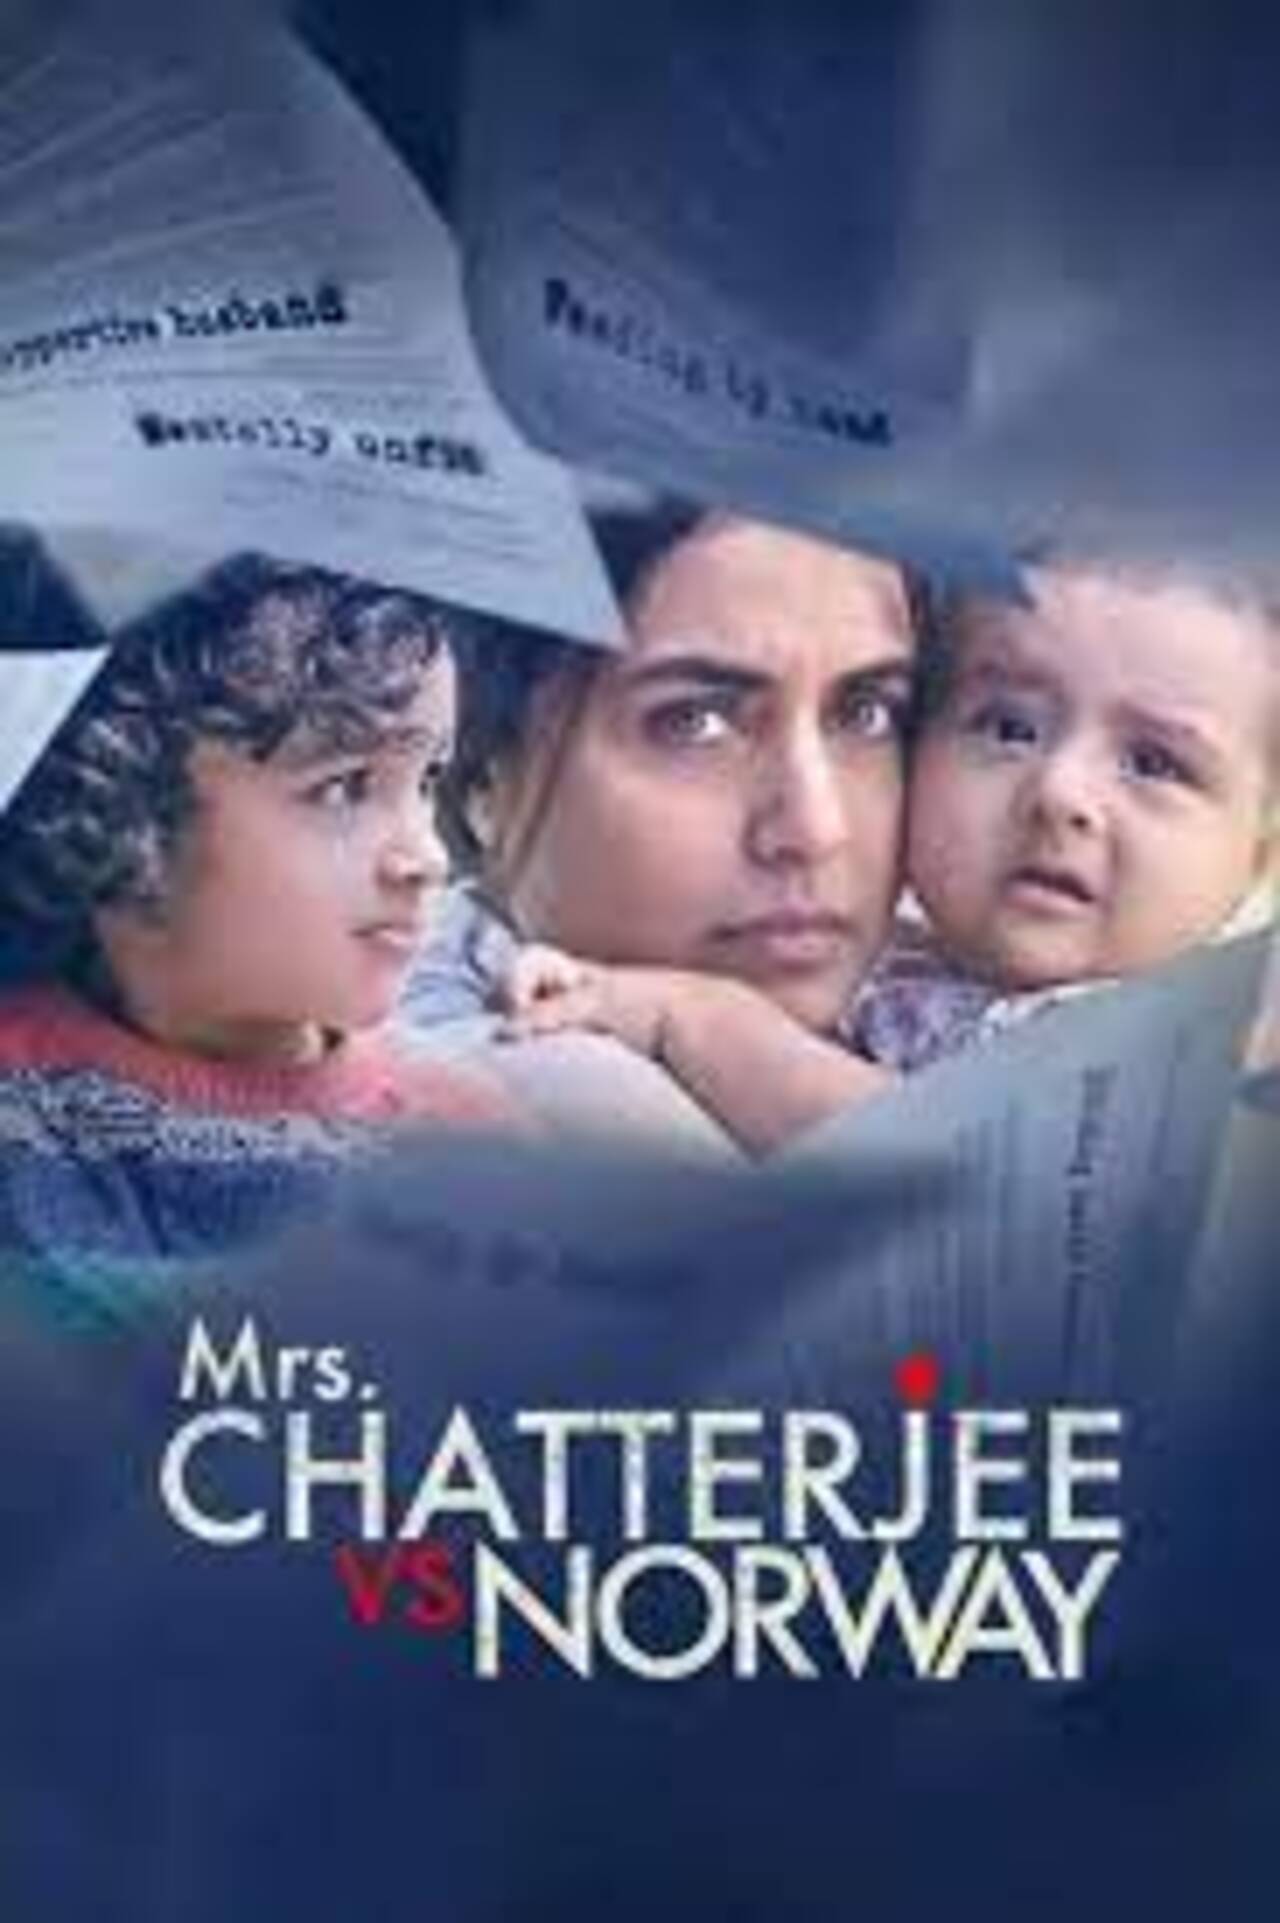 Starring Rani Mukerji in the lead role, 'Mrs Chatterjee vs Norway' revolves around Anurupa Chatterjee, an Indian woman who fought a legal battle against the Norwegian government to retain custody of her children